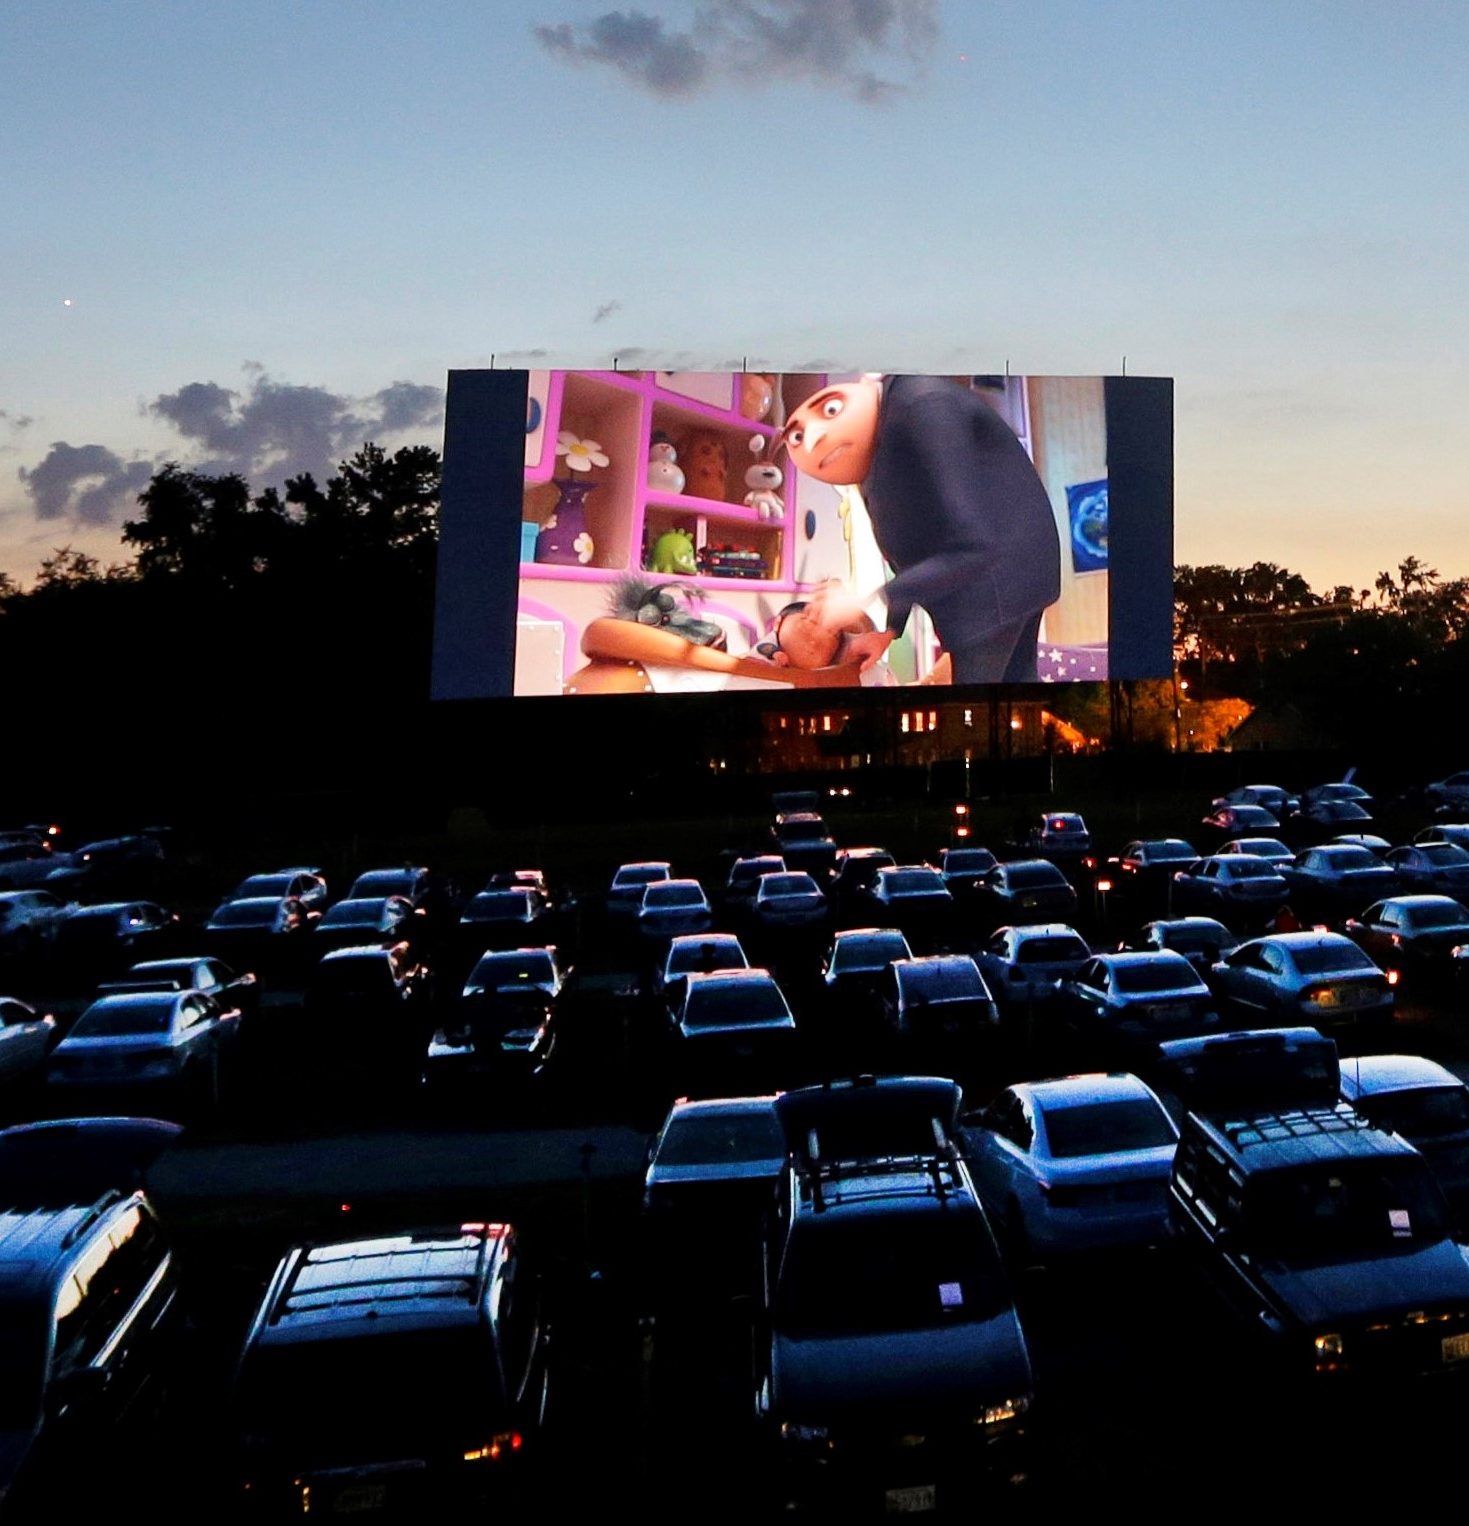 DriveIn Movie Theaters Are Suddenly Back in Demand Headline Wealth